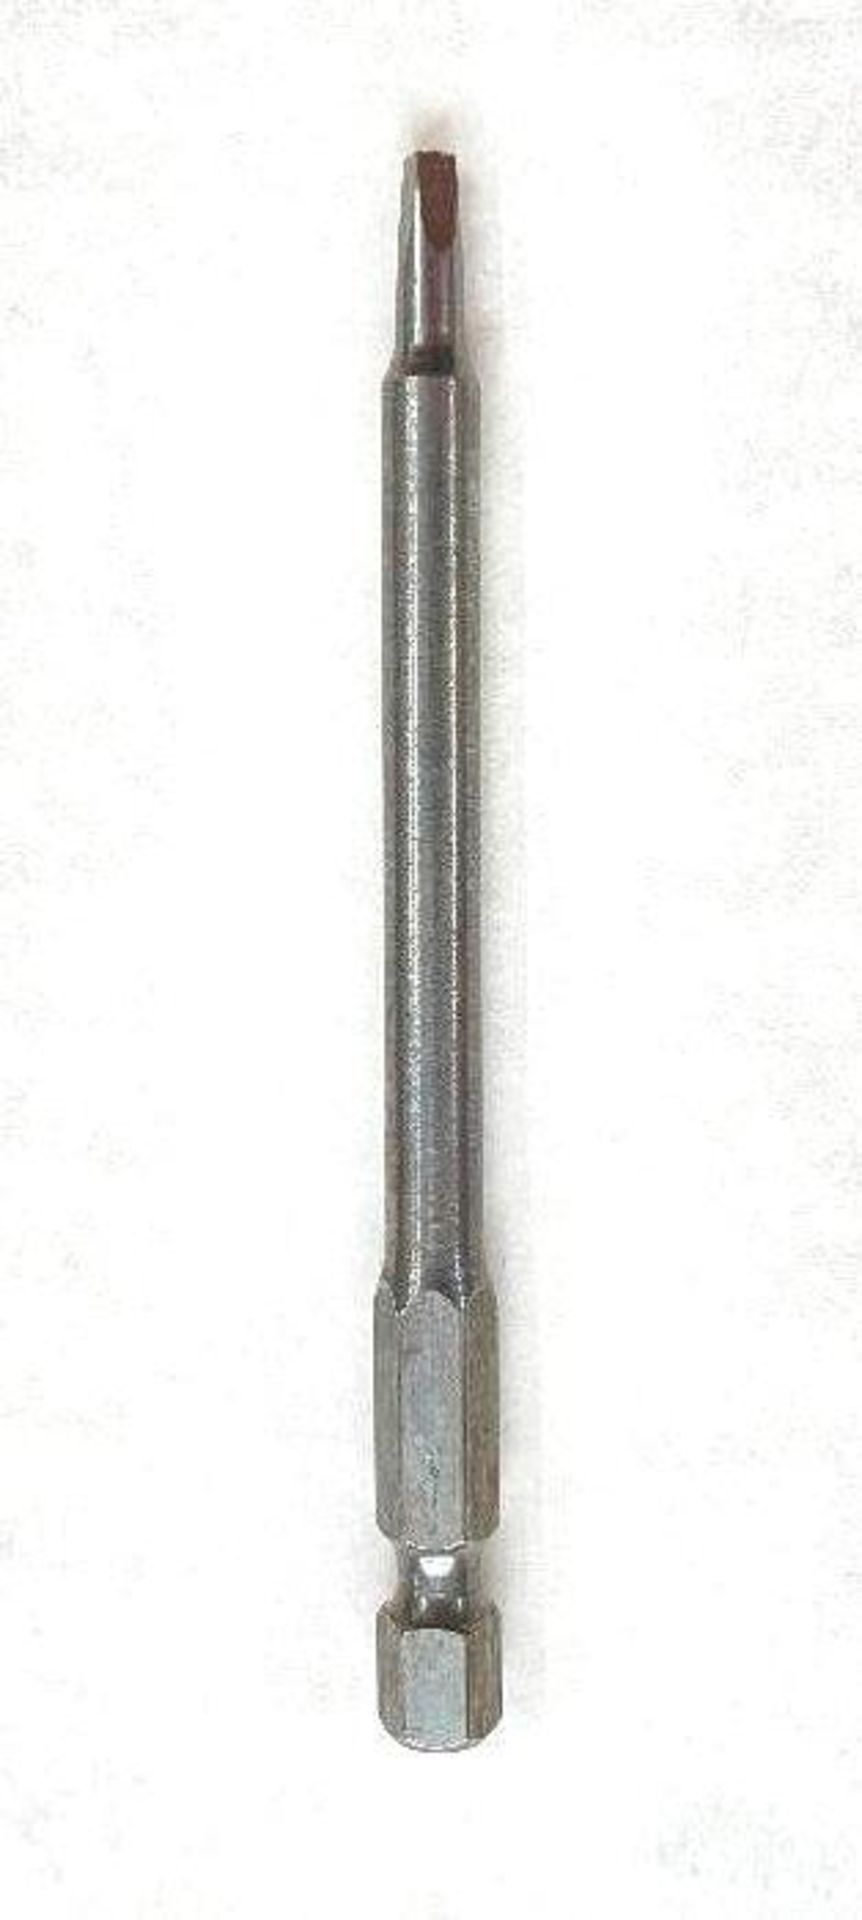 (2300) 1/4" HEX SQUARE RECESS POWER BIT, R1, 3-1/2" LONG BRAND/MODEL EAZYPOWER 80580 RETAIL PRICE (T